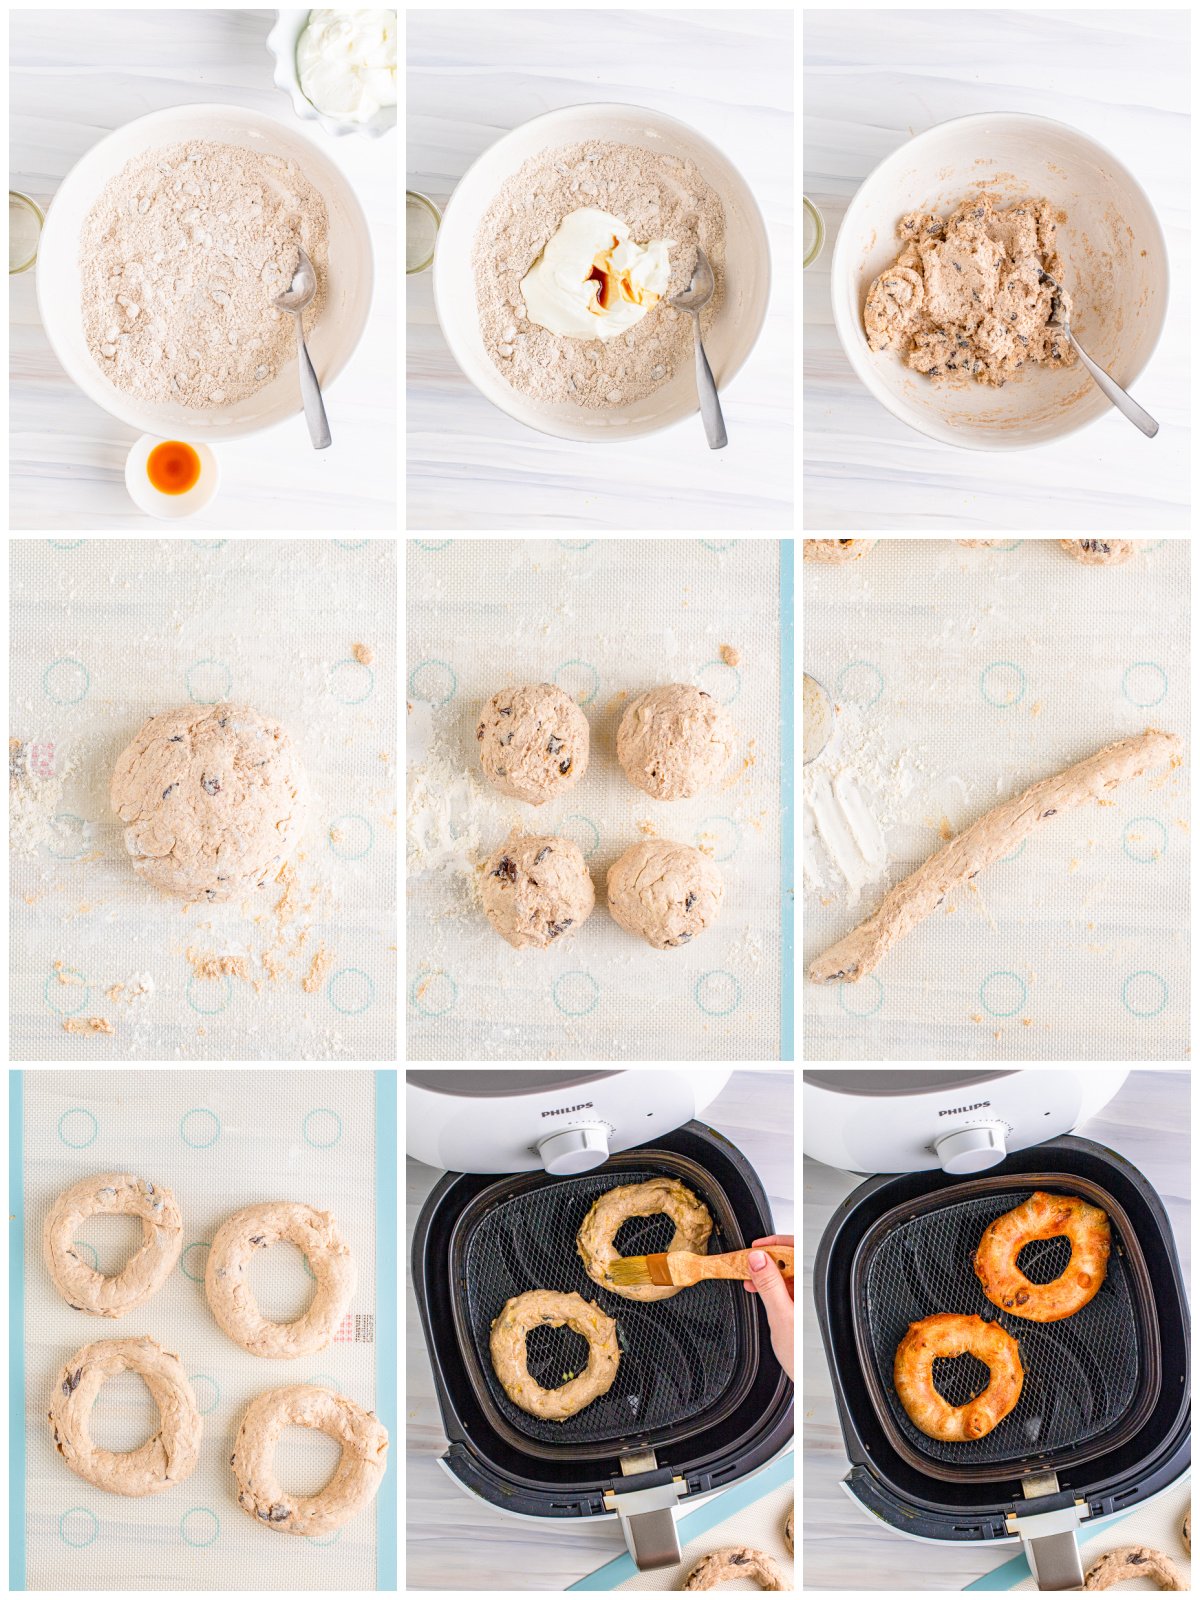 Step by step photos on how to make Air Fryer Cinnamon Raisin Bagels.